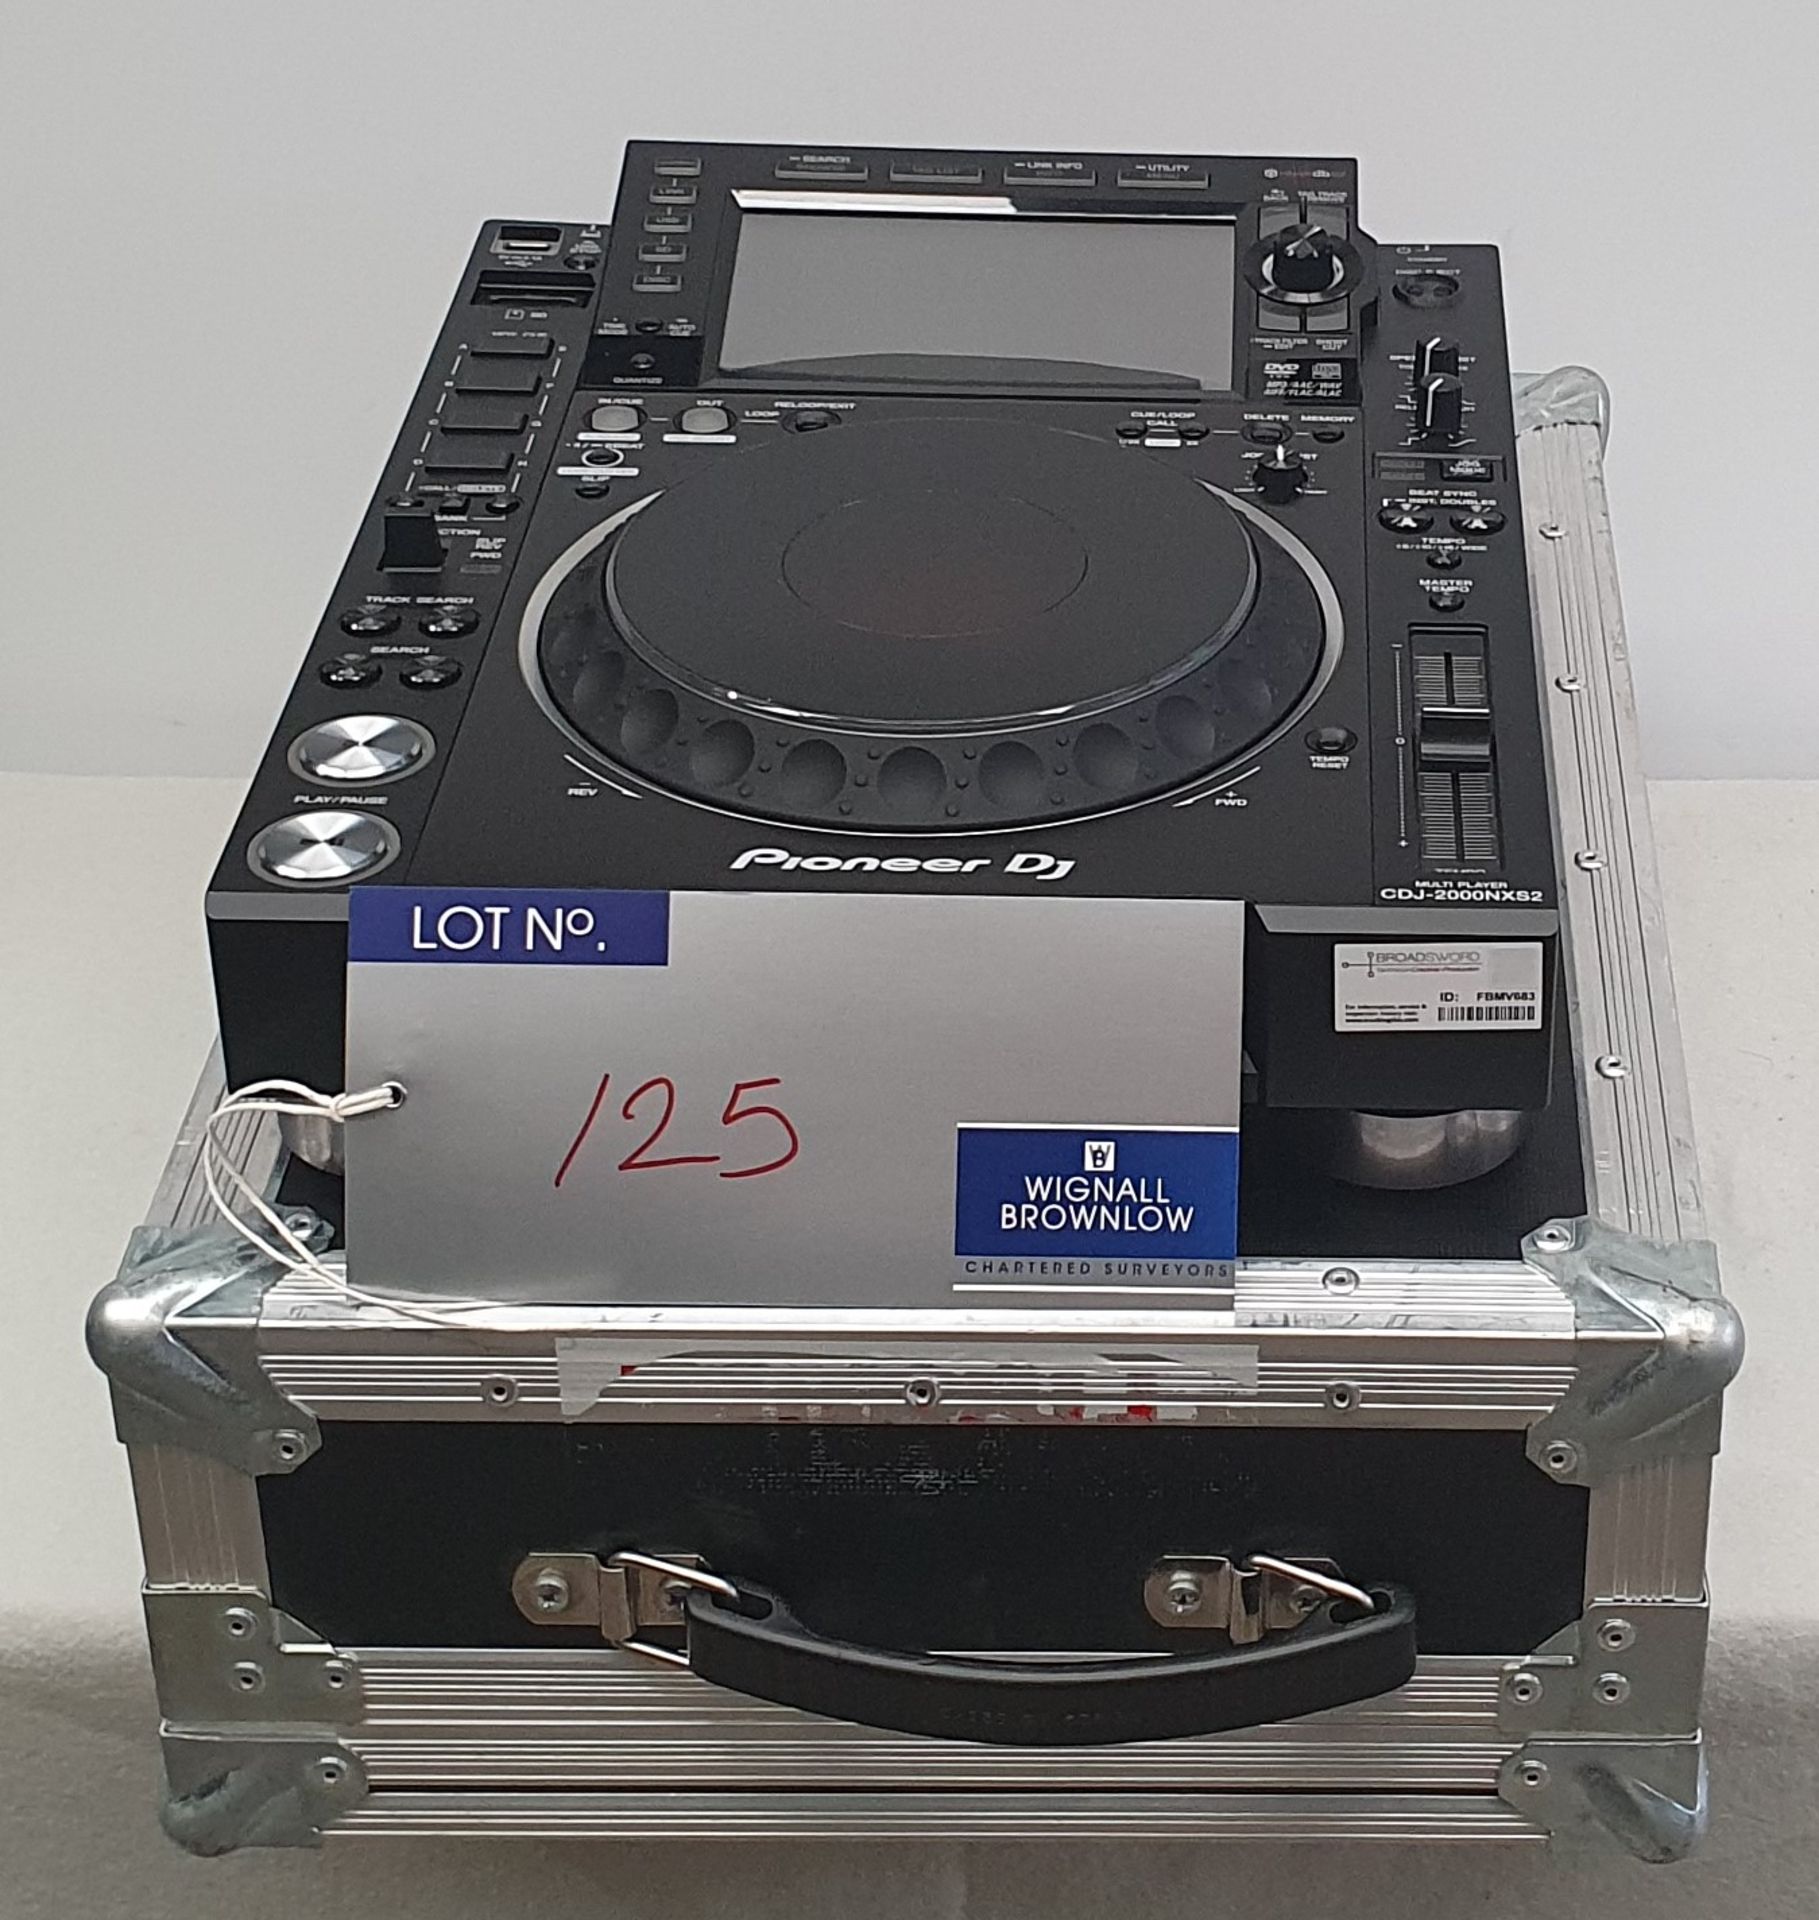 A Pioneer CDJ-2000NXS2 CD Turntable (as new, tested and serviced) with flight case.